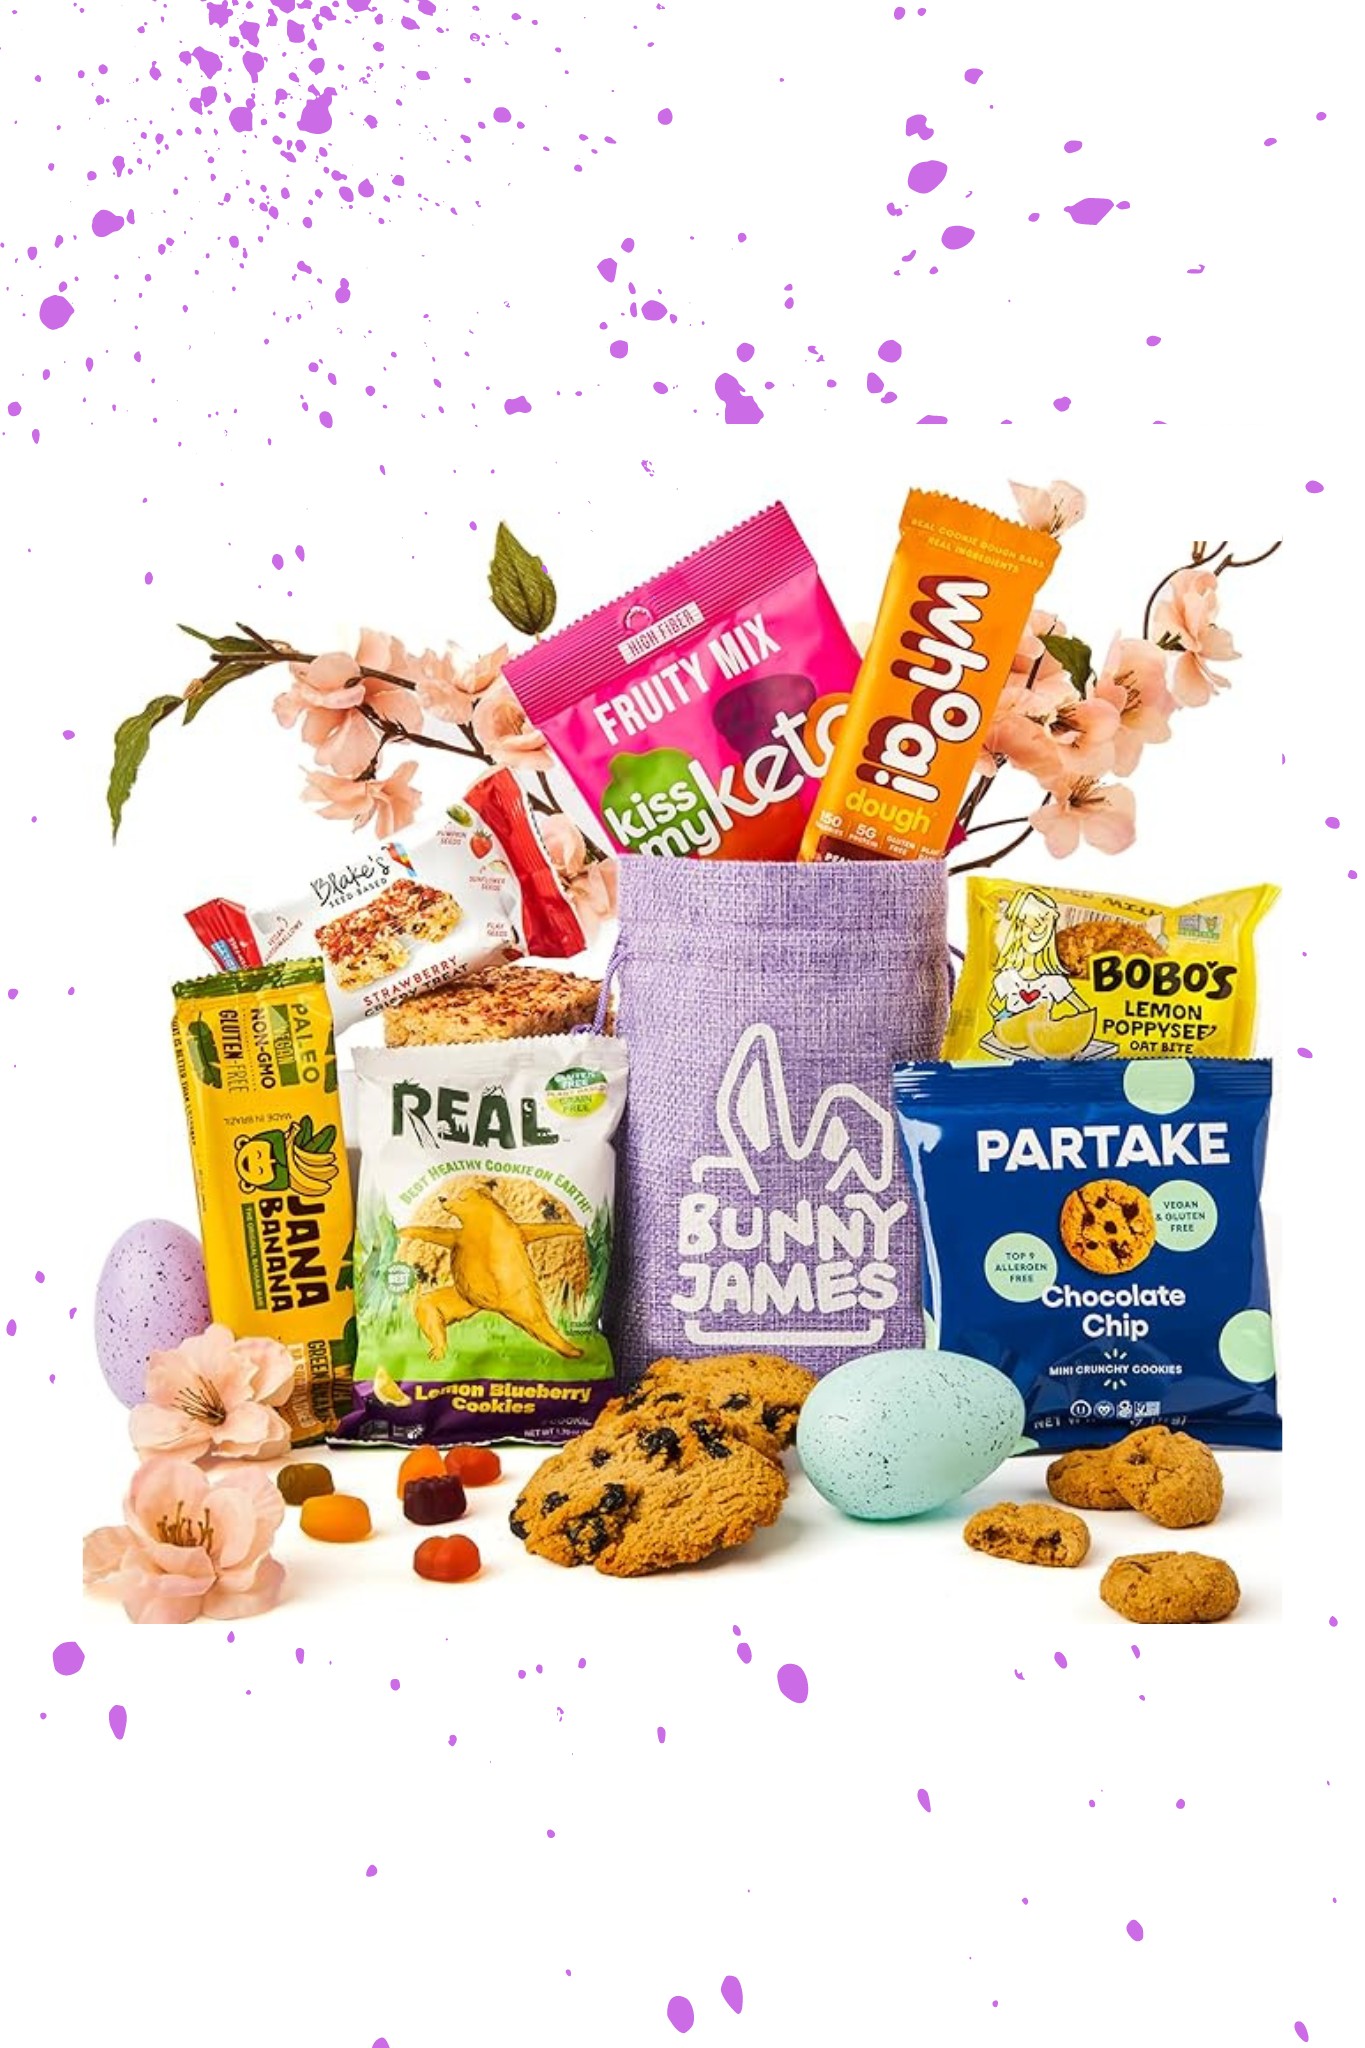 A purple bag with an Easter bunny on it with various gluten free Easter treats around it.